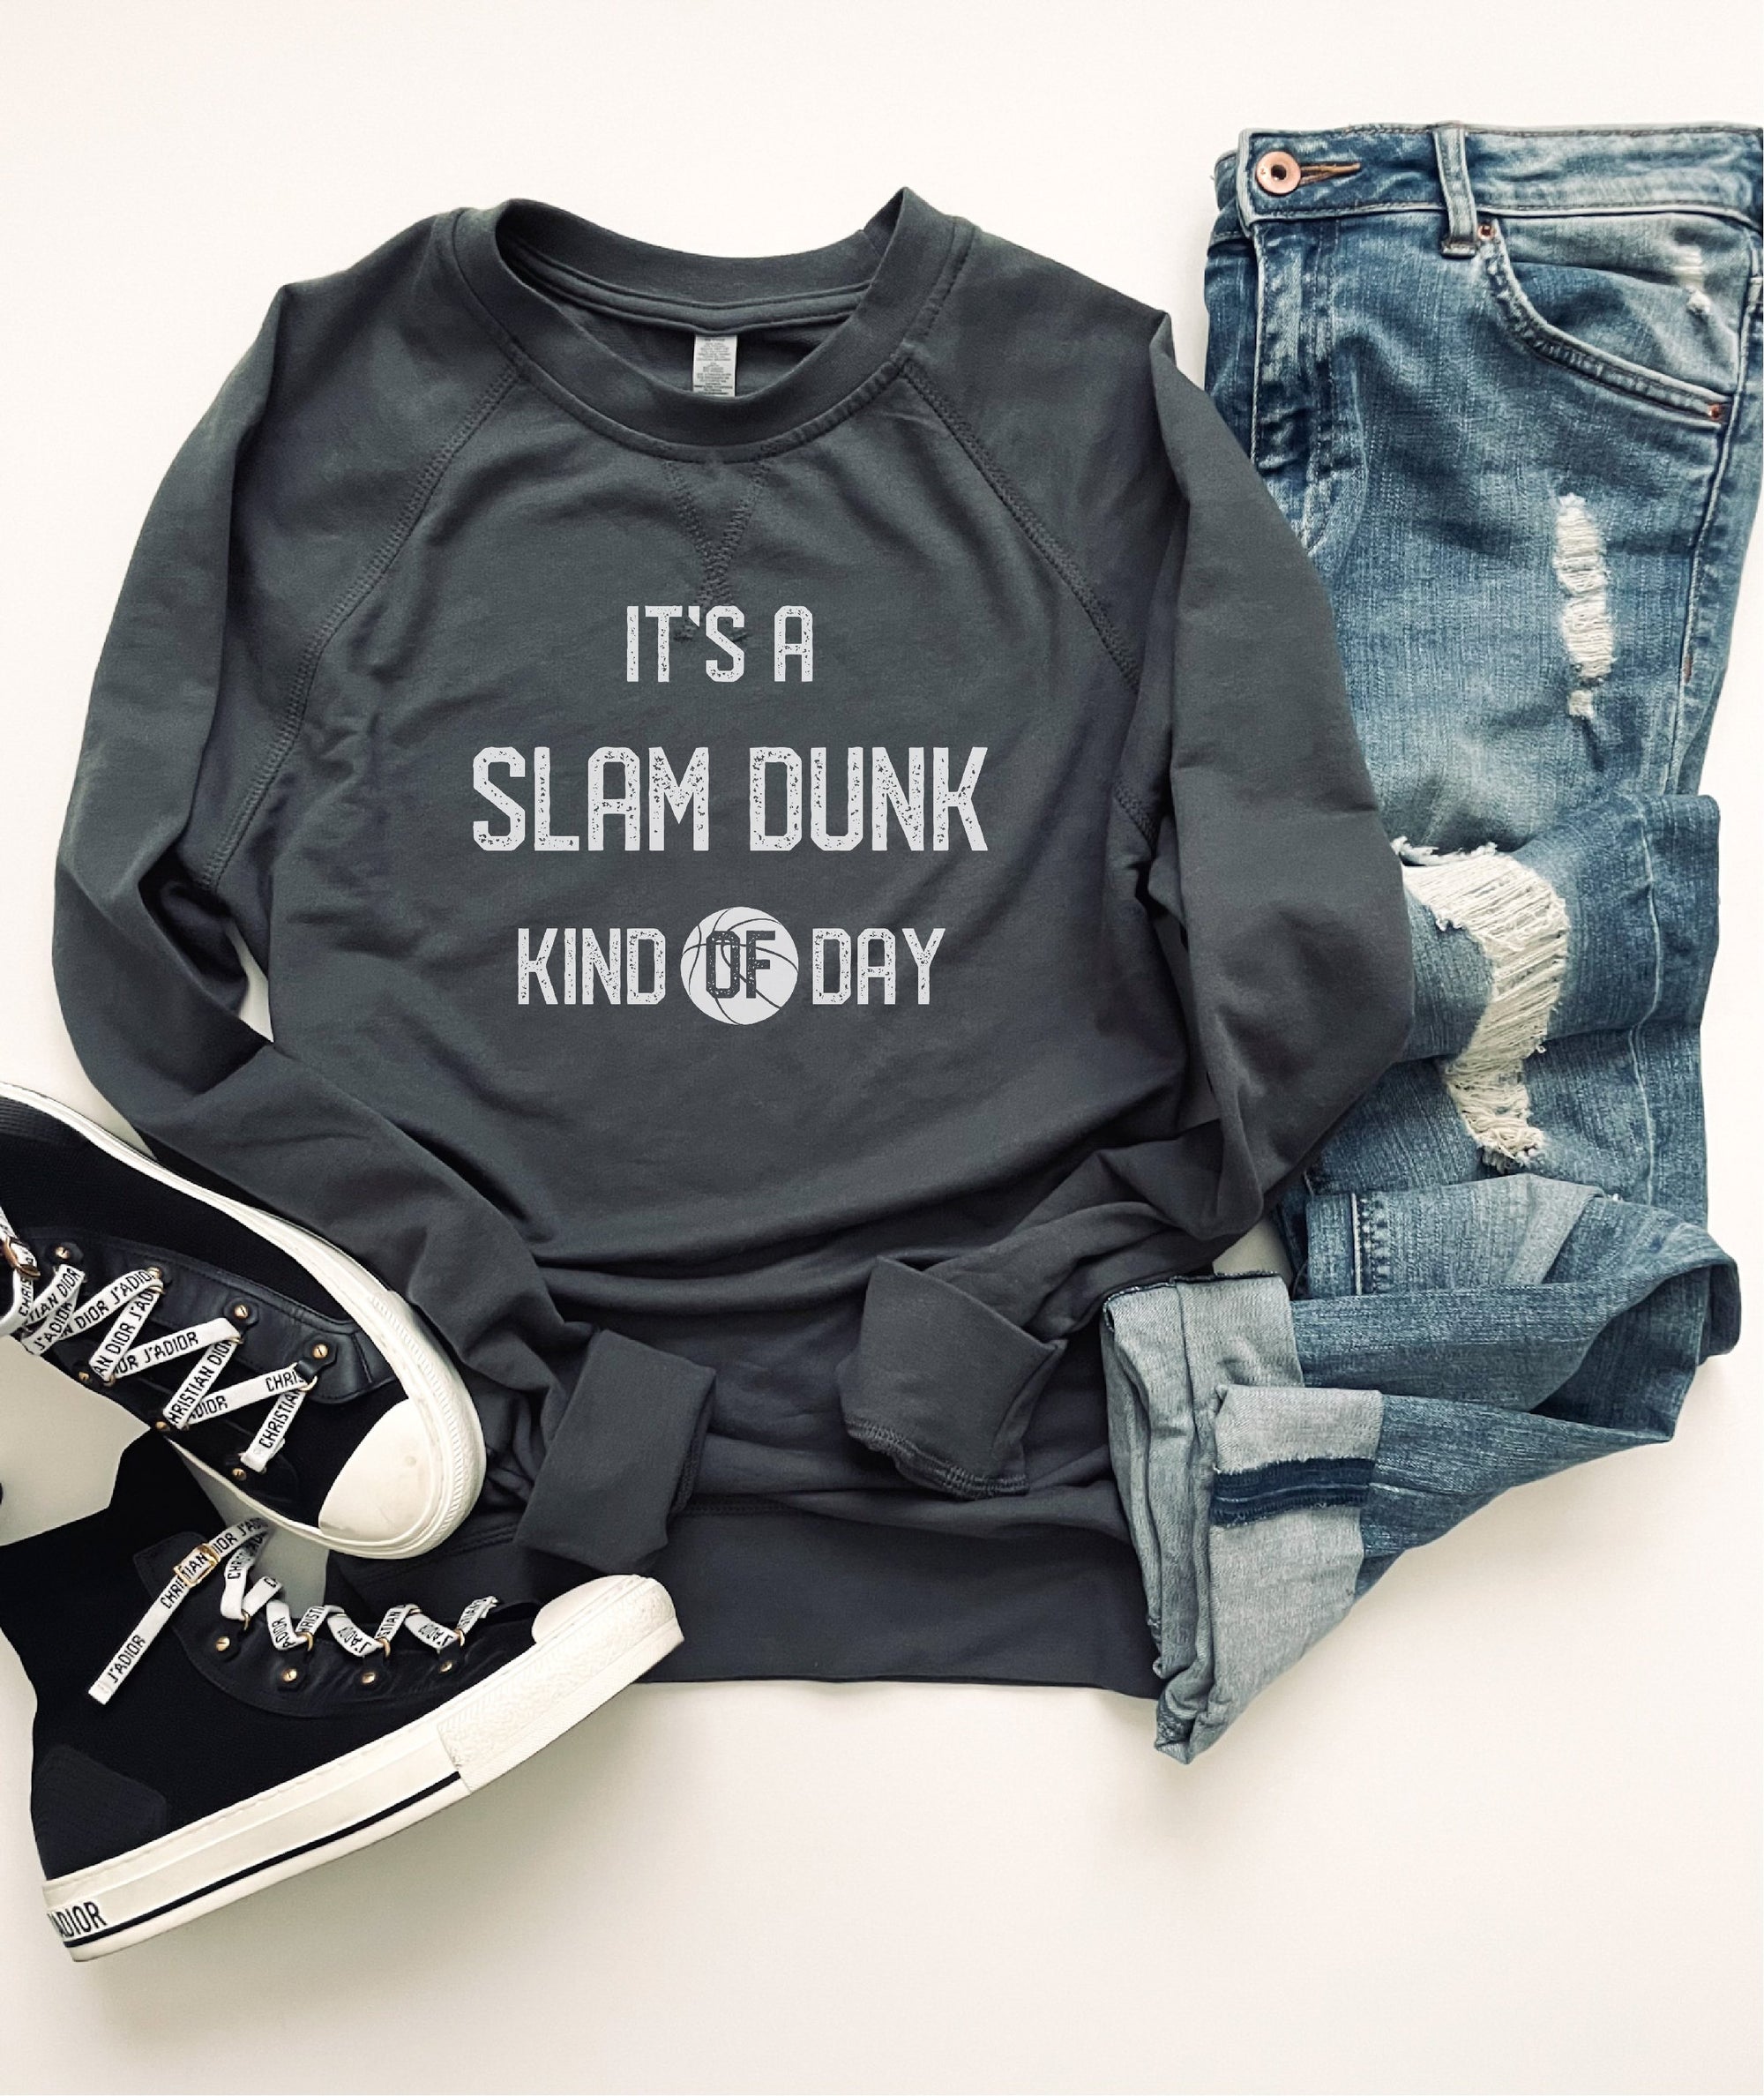 Slam dunk kind of day french terry raglan Sports French Terry raglan Cotton heritage and lane seven French Terry raglan 